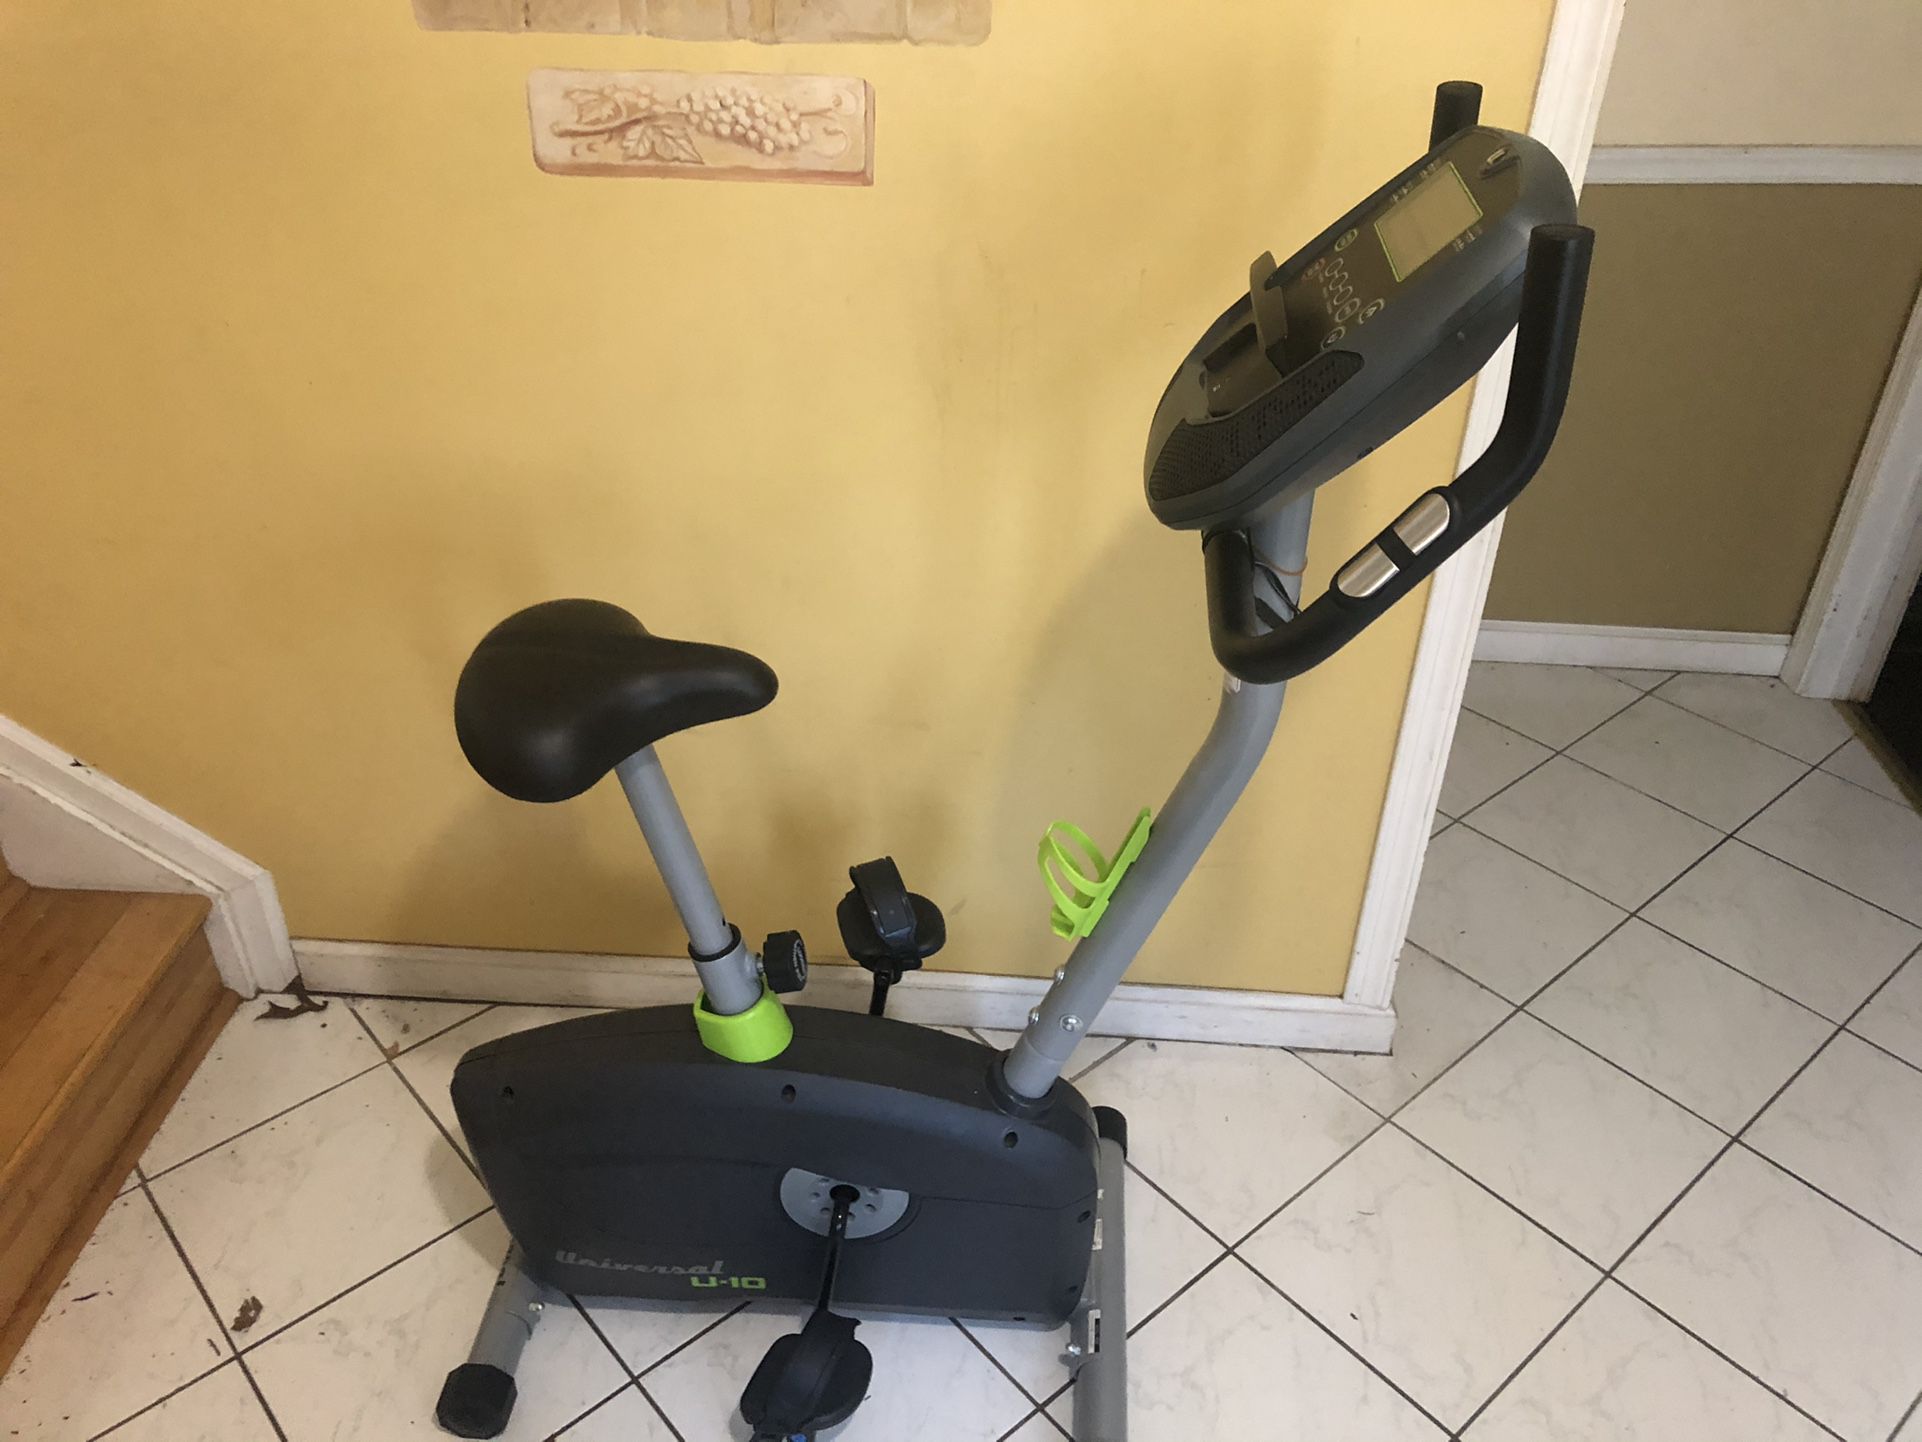 Excellent Condition Exercise Bike